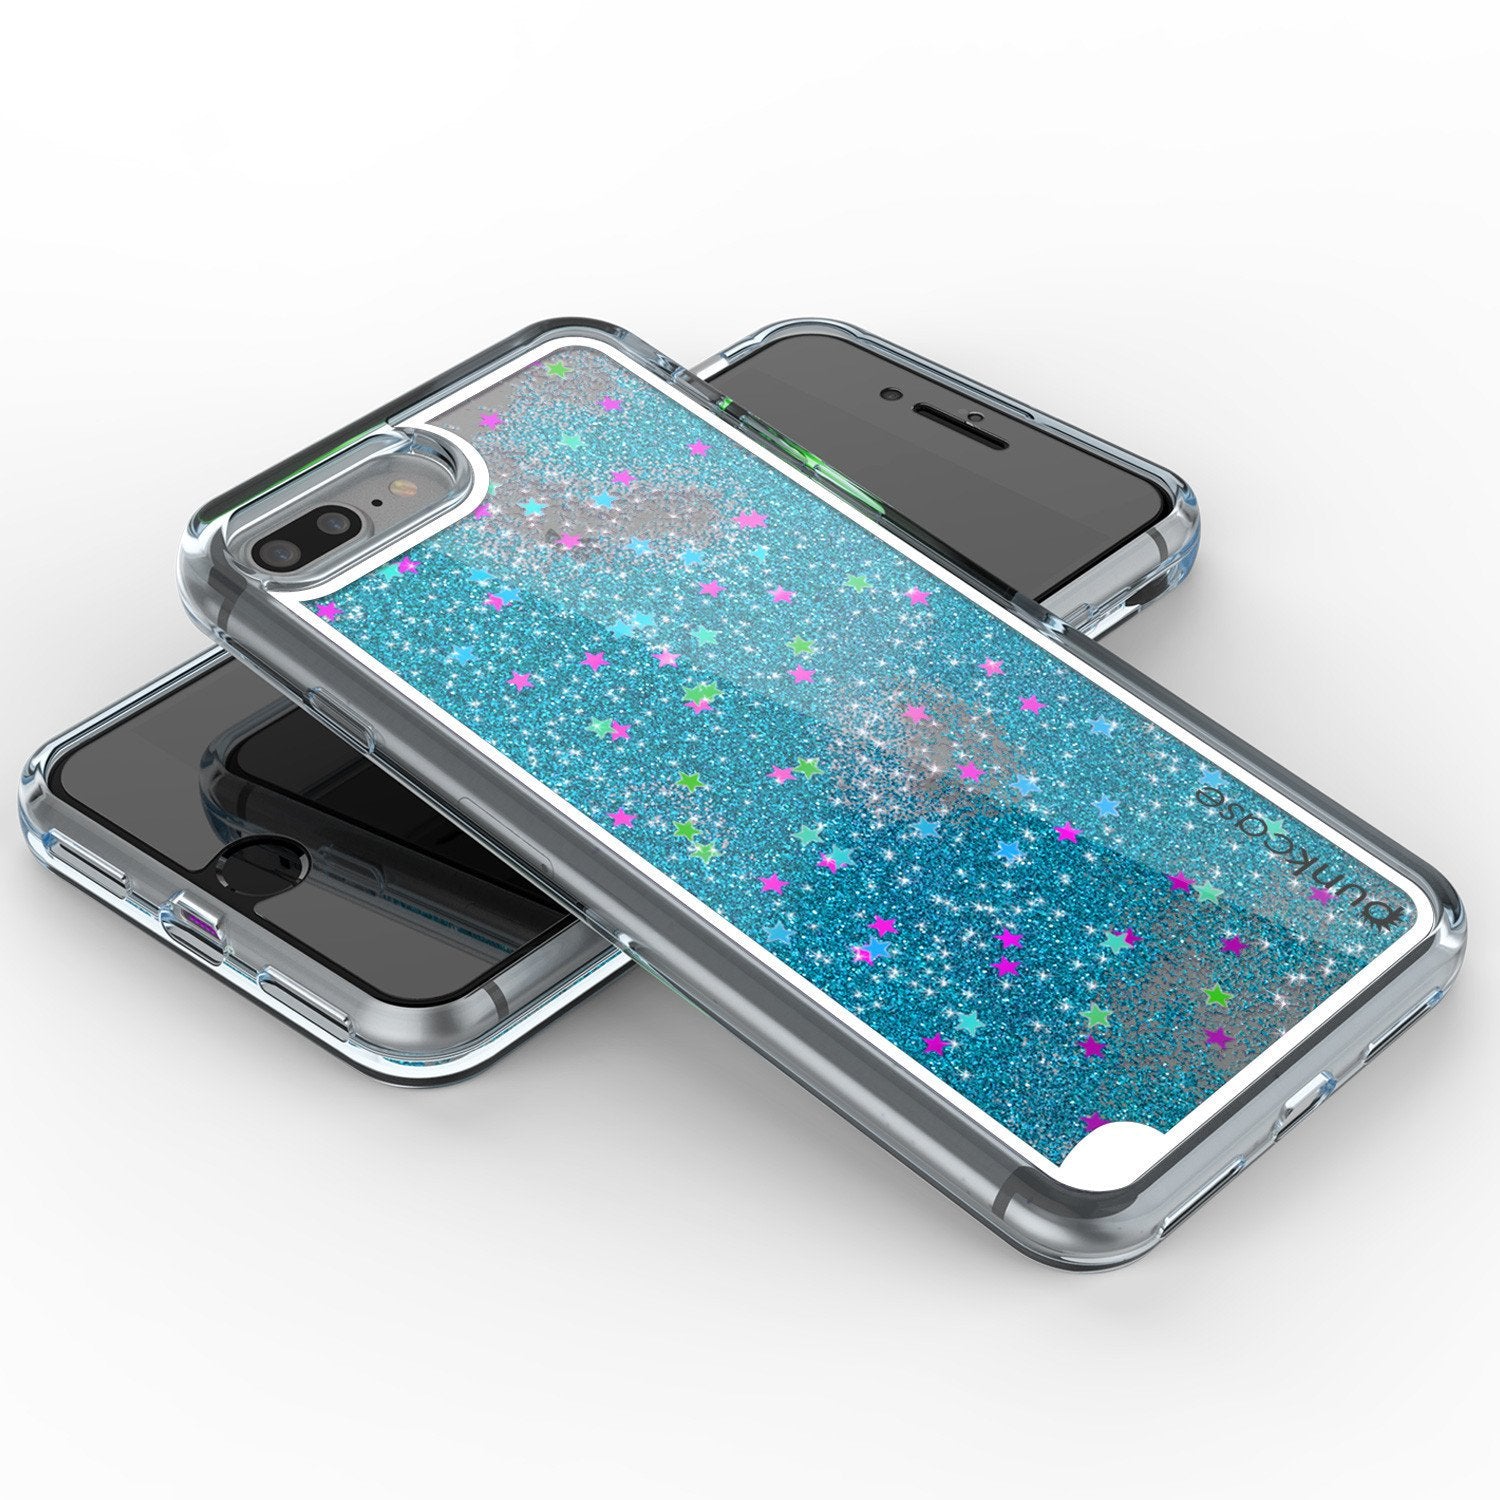 iPhone 7 Plus Case, Punkcase [Liquid Teal Series] Protective Dual Layer Floating Glitter Cover with lots of Bling & Sparkle + 0.3mm Tempered Glass Screen Protector for Apple iPhone 7s Plus